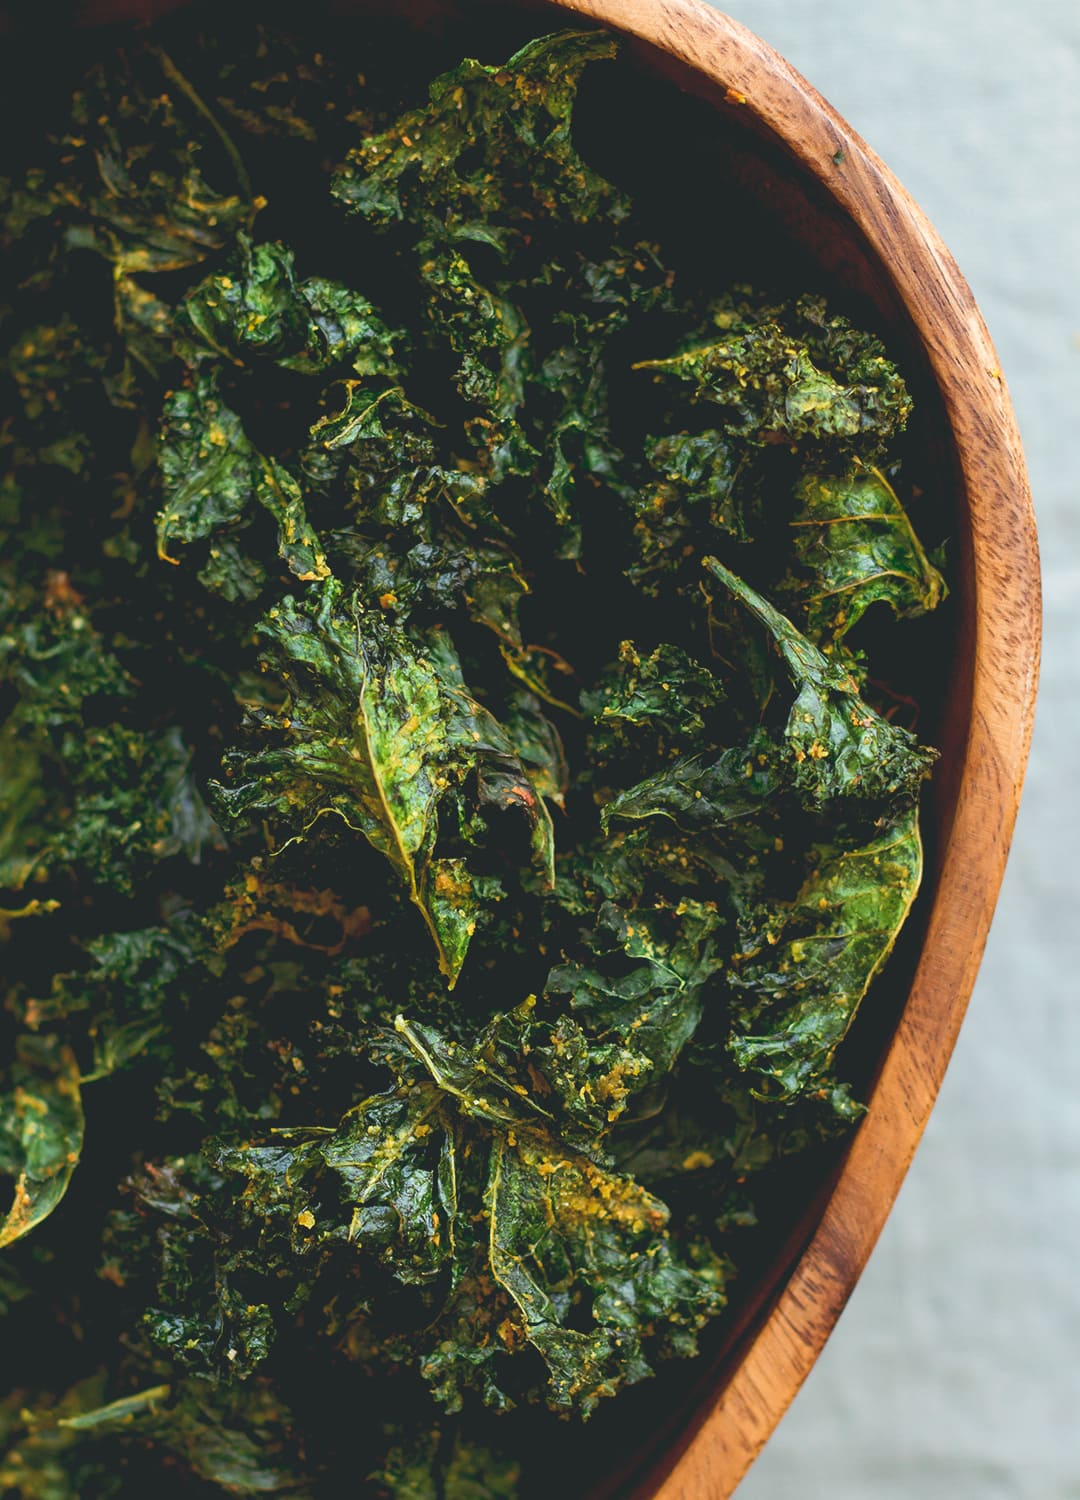 Onion Kale Chips - made in the oven in under 30 minutes! Easy & delicious these kale chips are the perfect movie night snack or anytime you're craving something salty & crunchy. | thehealthfulideas.com